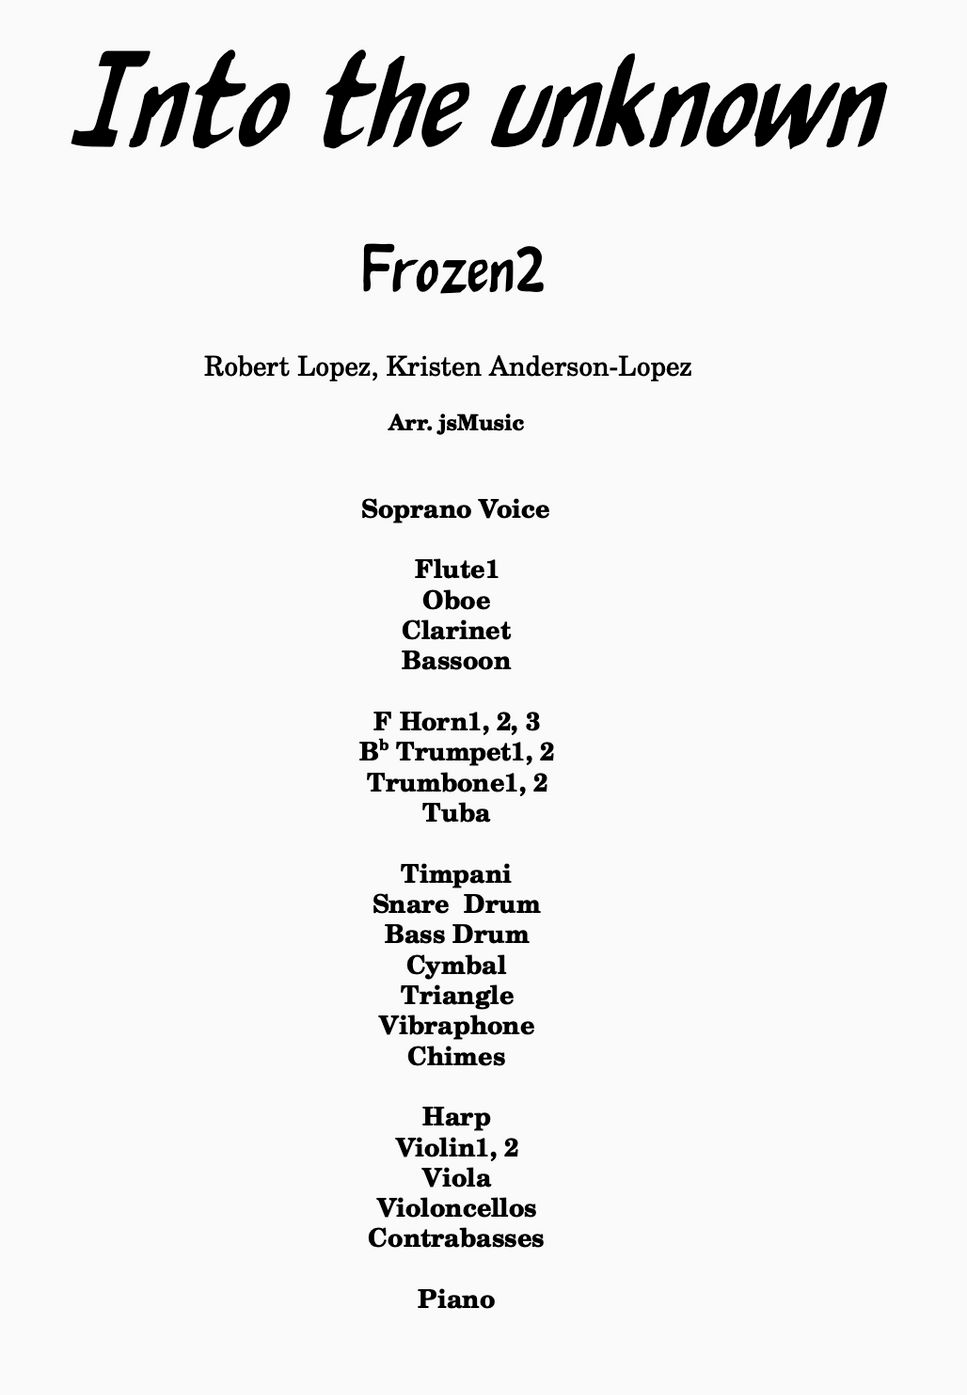 Frozen2 - Into the unknown (Orchestra score and part score.) by jsMusic